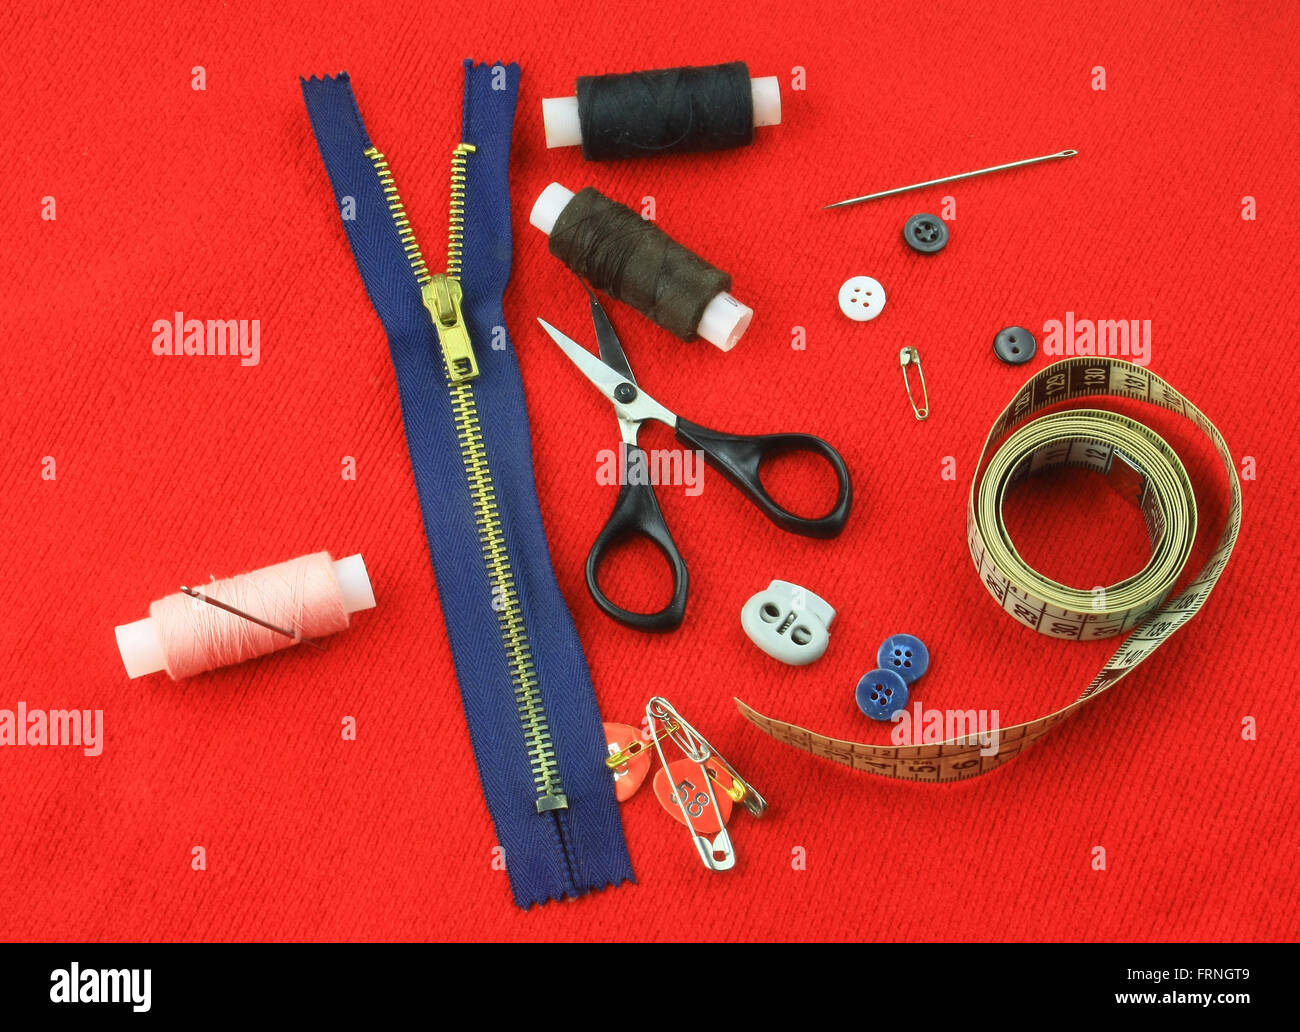 Tailoring accessories on red cloth Stock Photo